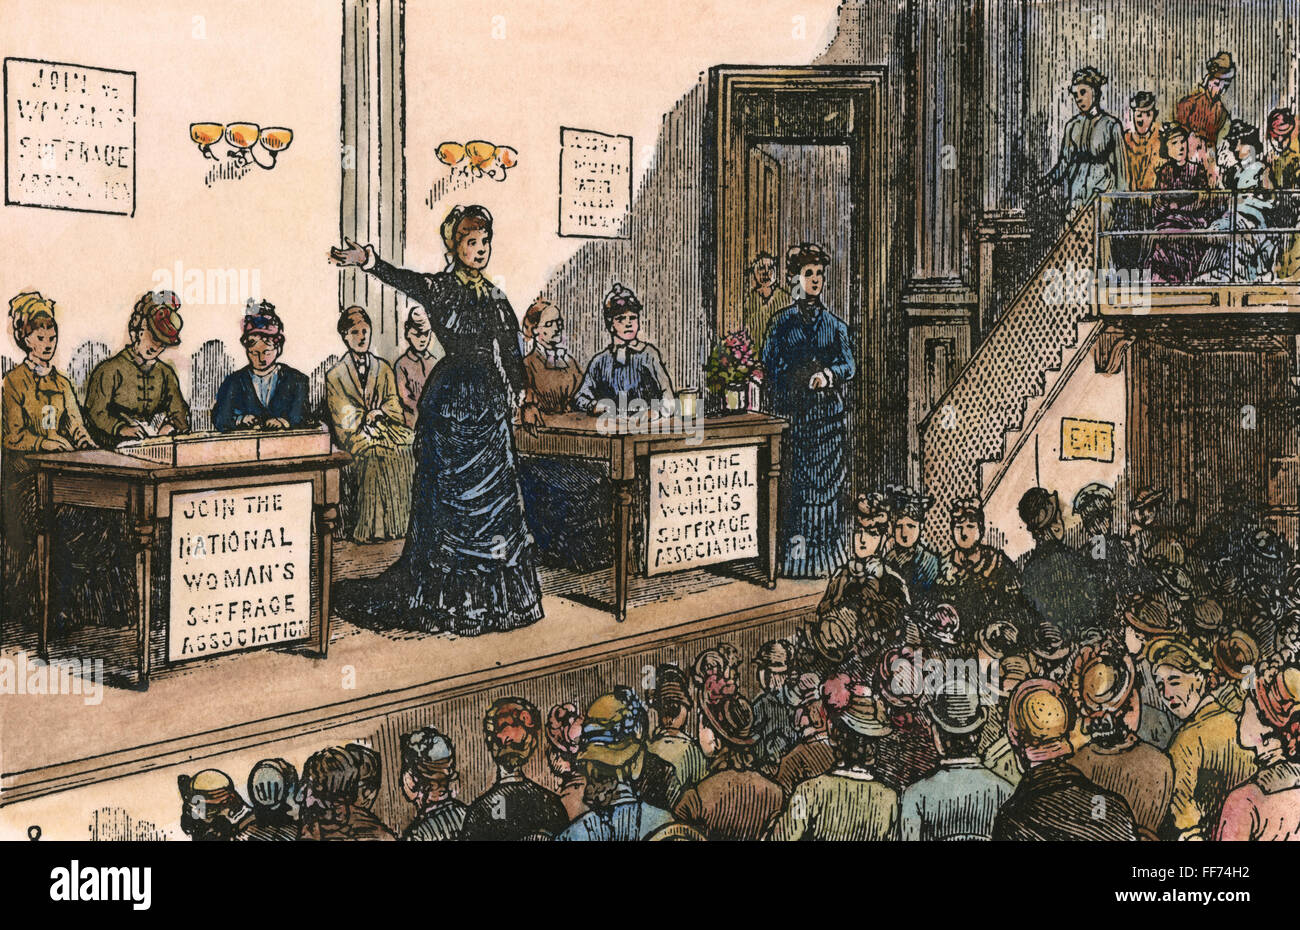 WOMEN'S RIGHTS, 1870s. /nA meeting of the National Women's Suffrage Association in the 1870s, with Susan B. Anthony and Elizabeth Cady Stanton on the platform. Contemporary wood engraving. Stock Photo